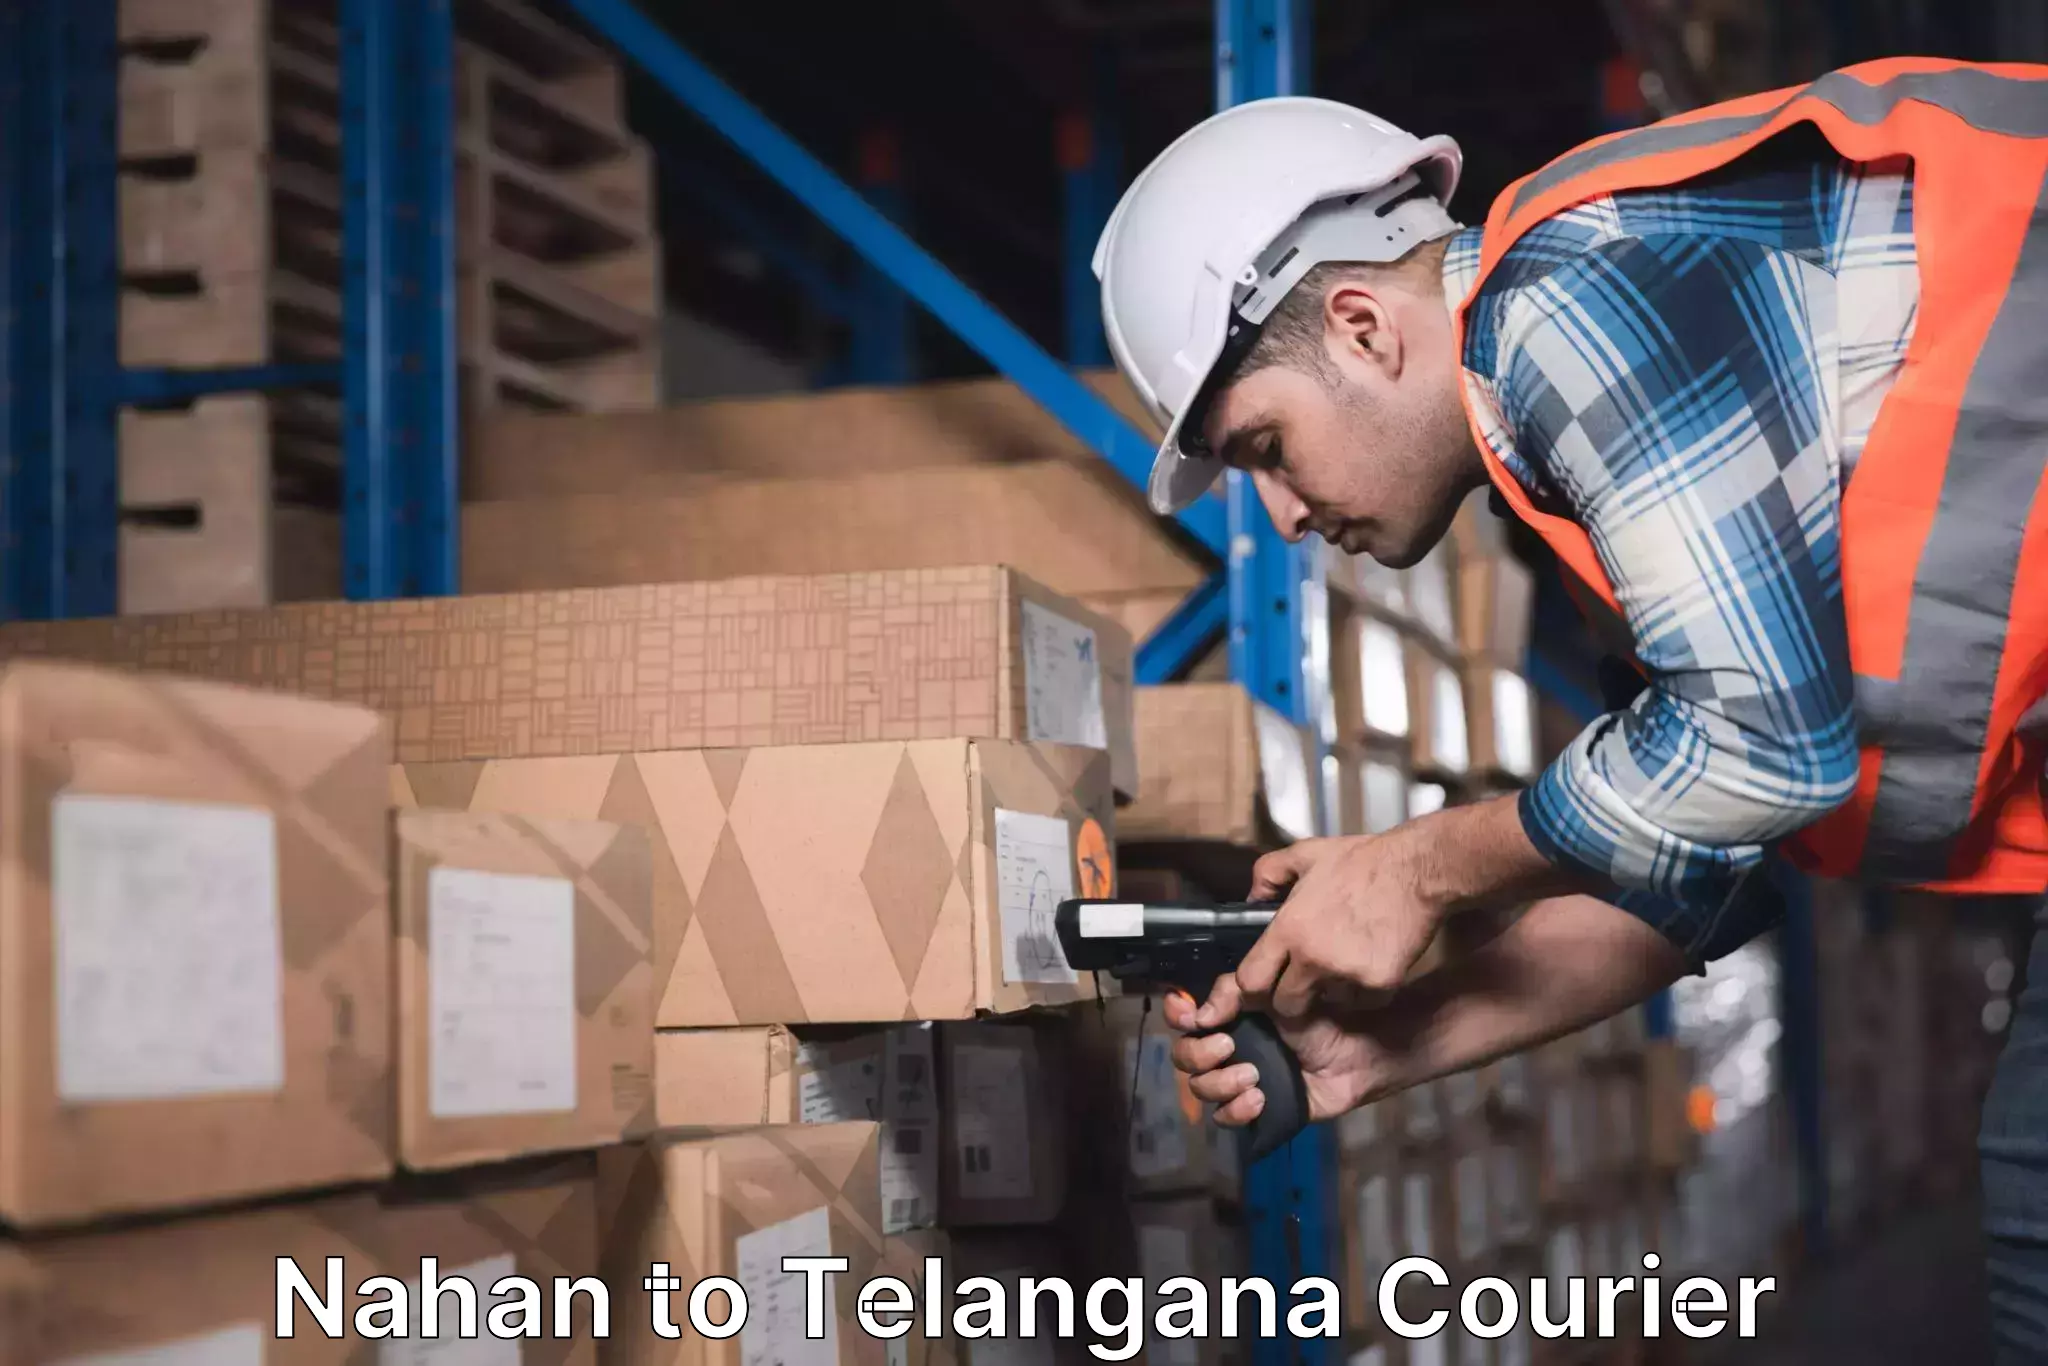 Courier service comparison Nahan to Yellareddy